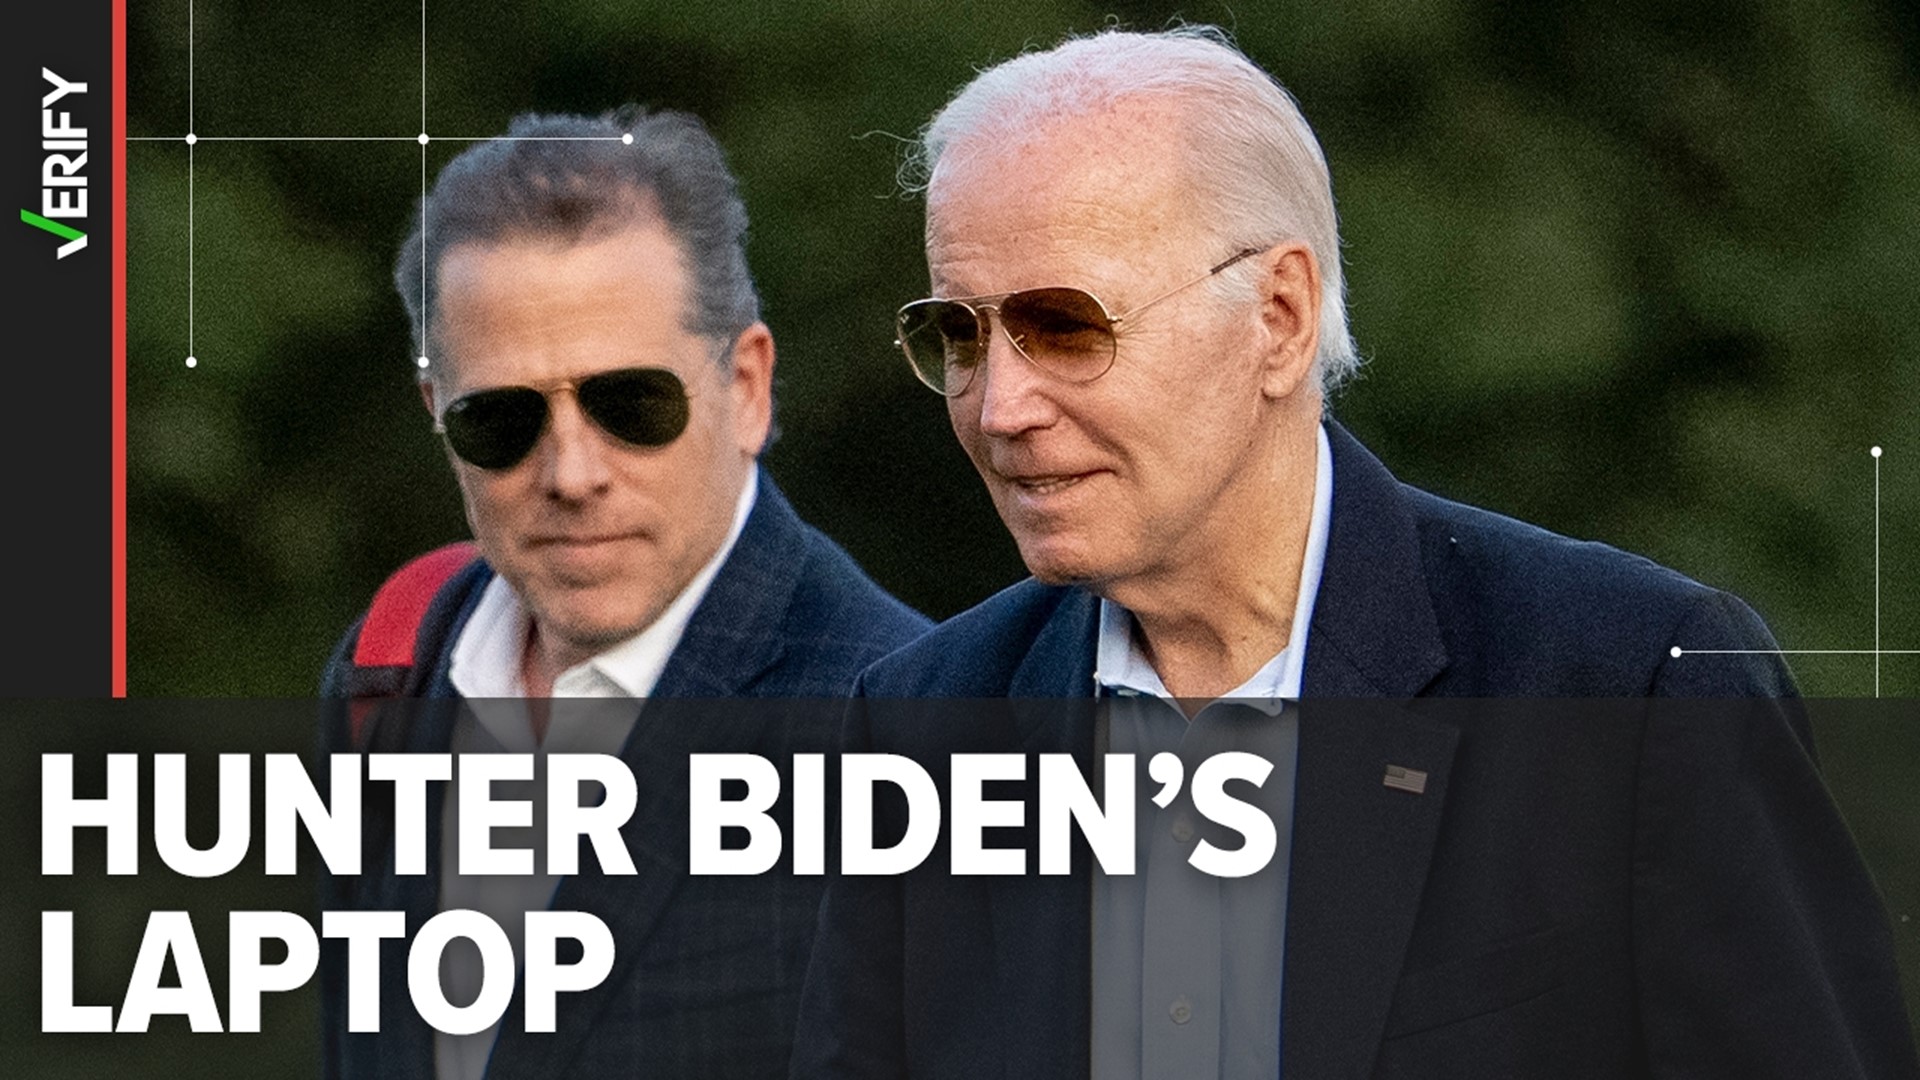 With David Weiss indicting President Joe Biden’s son Hunter on gun charges, a look at accusations of corruption and the infamous computer.